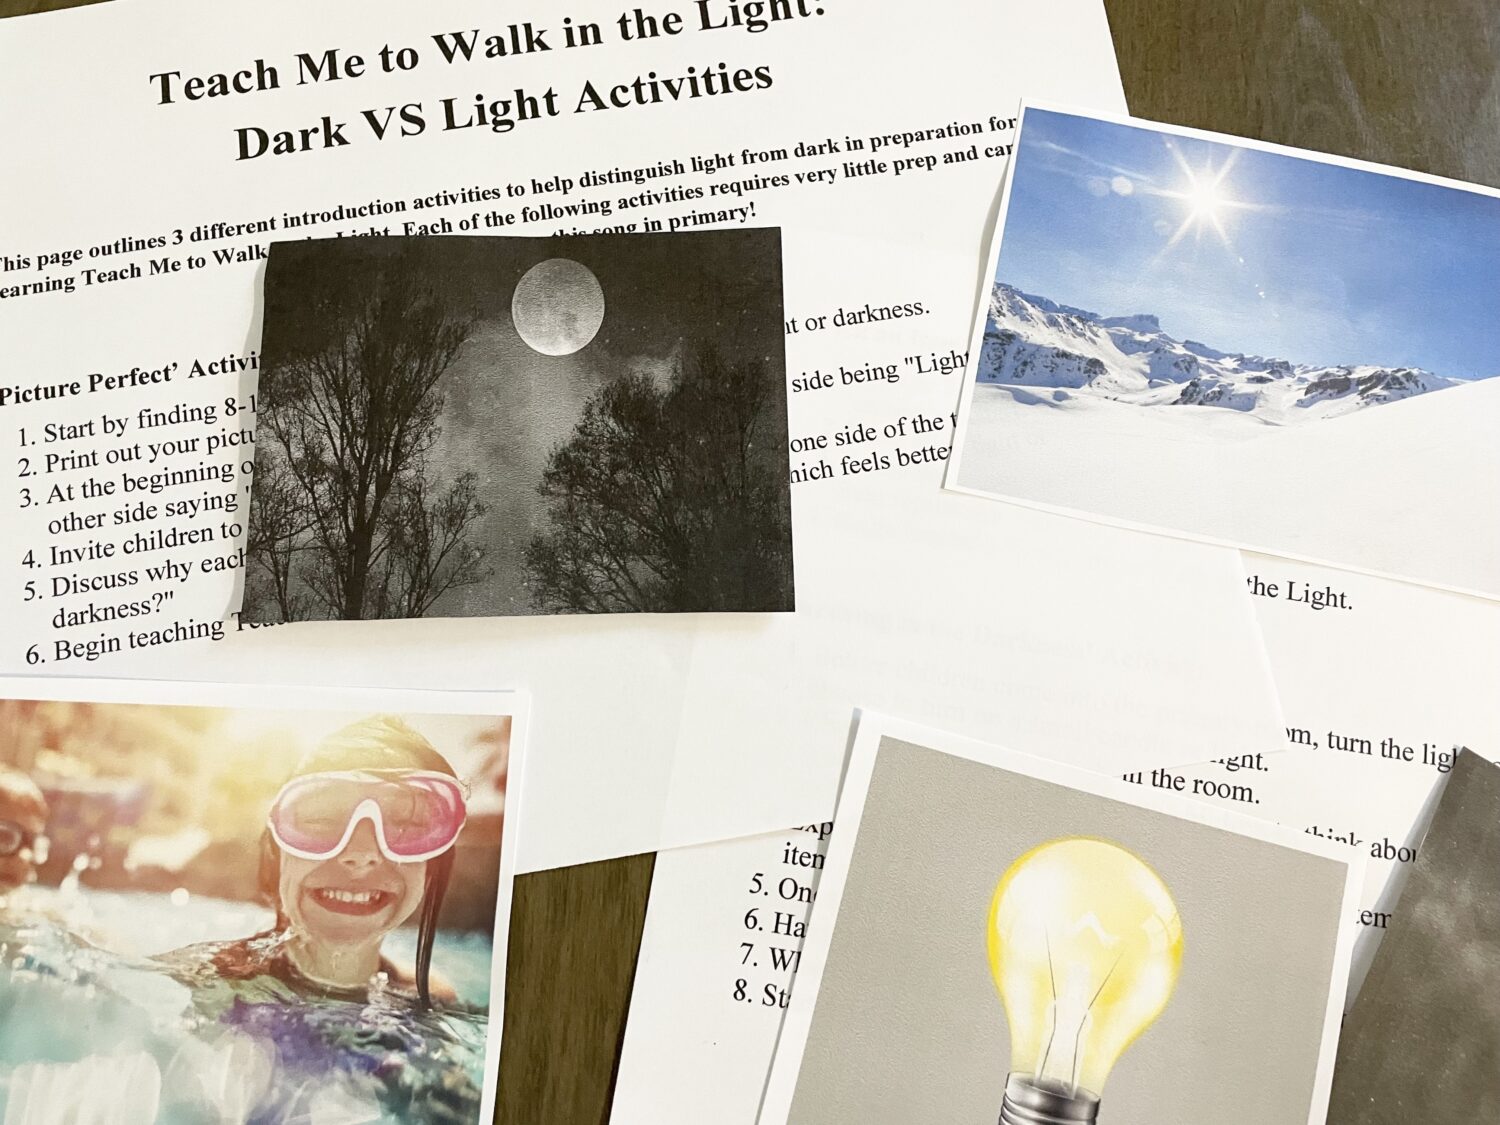 Teach Me to Walk in the Light Dark vs Light Singing Time idea for LDS Primary music leaders - compare and contrast light and darkness in this object lesson